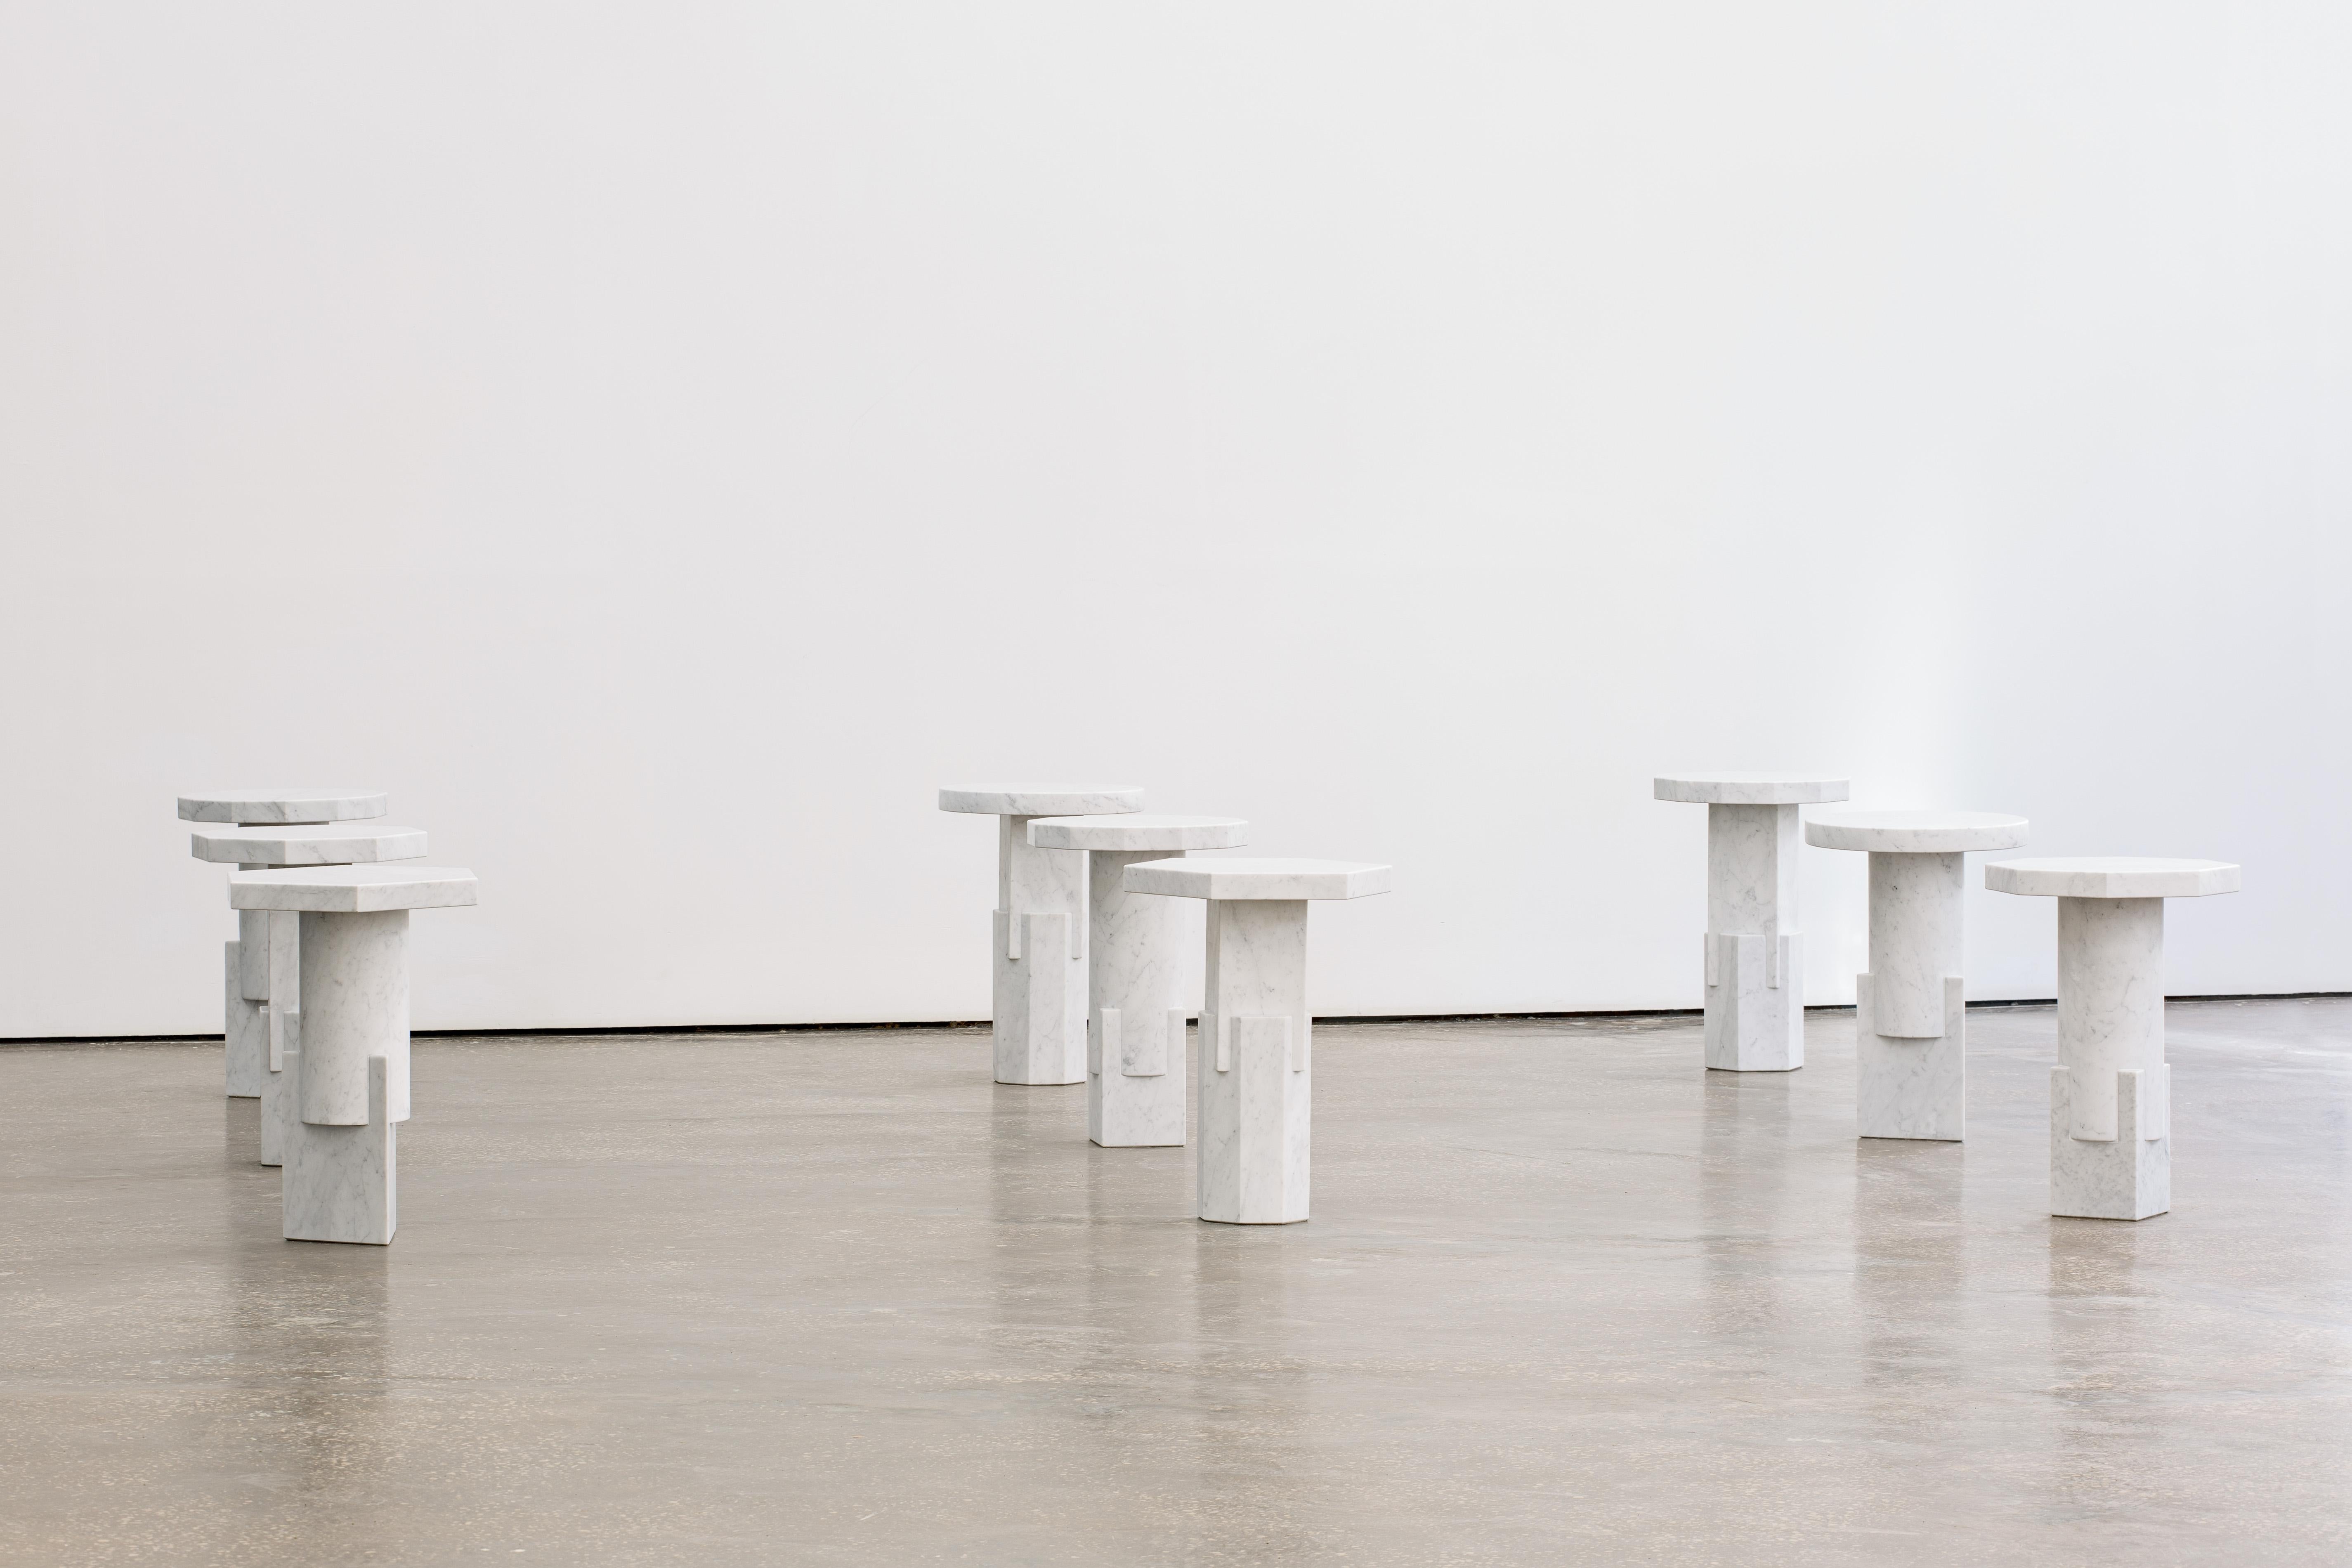 Marble Stylos side table by Oeuffice
One-off edition of 9 individually unique tables
2016
Materials: White Carrara marble
Dimensions: L 40 x W 40 x H 60 cm

One-off edition of 9 individually unique tables. Kapital is a series of limited